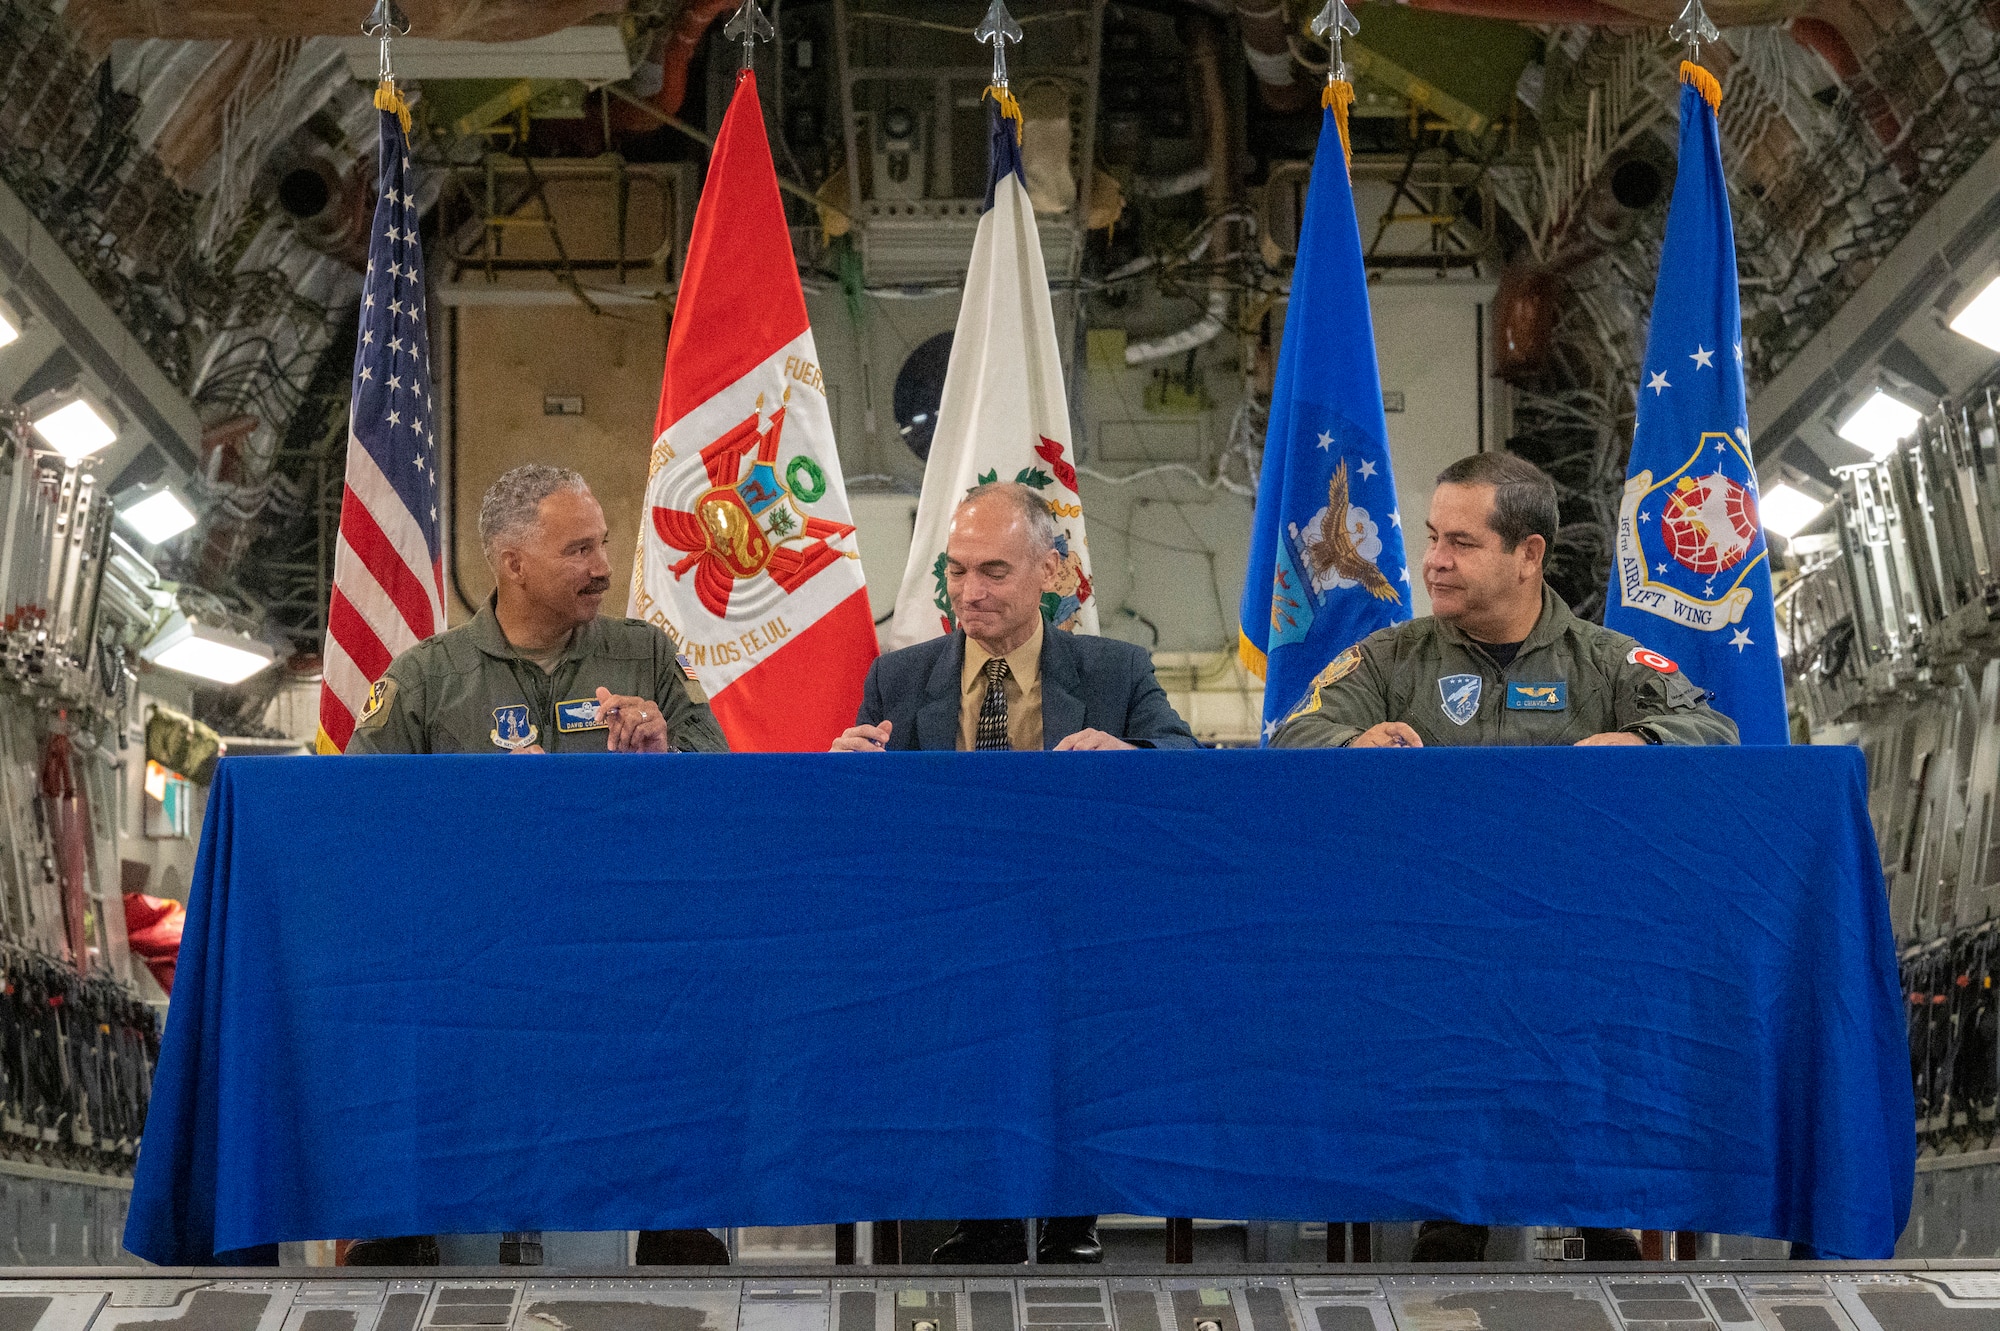 U.S. Air Force Brig. Gen. David Cochran, West Virginia National Guard assistant adjutant general and commander of the West Virginia Air National Guard; David Delmonaco, 12th Air Force (Air Forces Southern) representative, and Lt. Gen. Carlos Chavez, the Peruvian Air Force chief of staff, sign a trilateral agreement of future engagements at the 167th Airlift Wing, Shepherd Field, Martinsburg, West Virginia, June 9, 2023. The signing ceremony signified the commitment to continue military cooperation and operate cohesively in response to future threats and crisis.